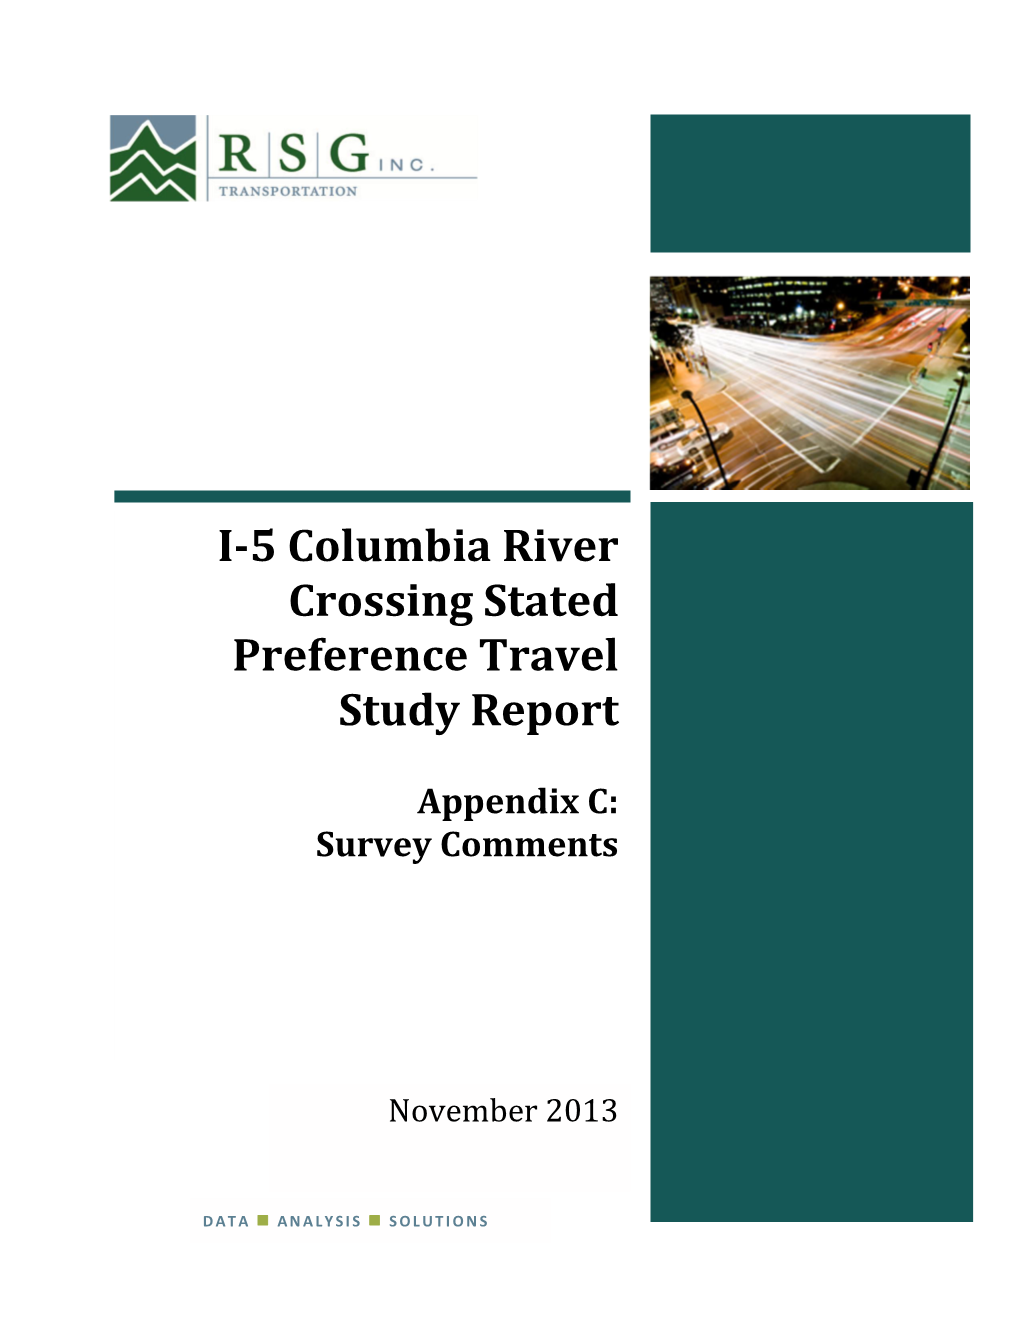 I-5 Columbia River Crossing Stated Preference Travel Study Report